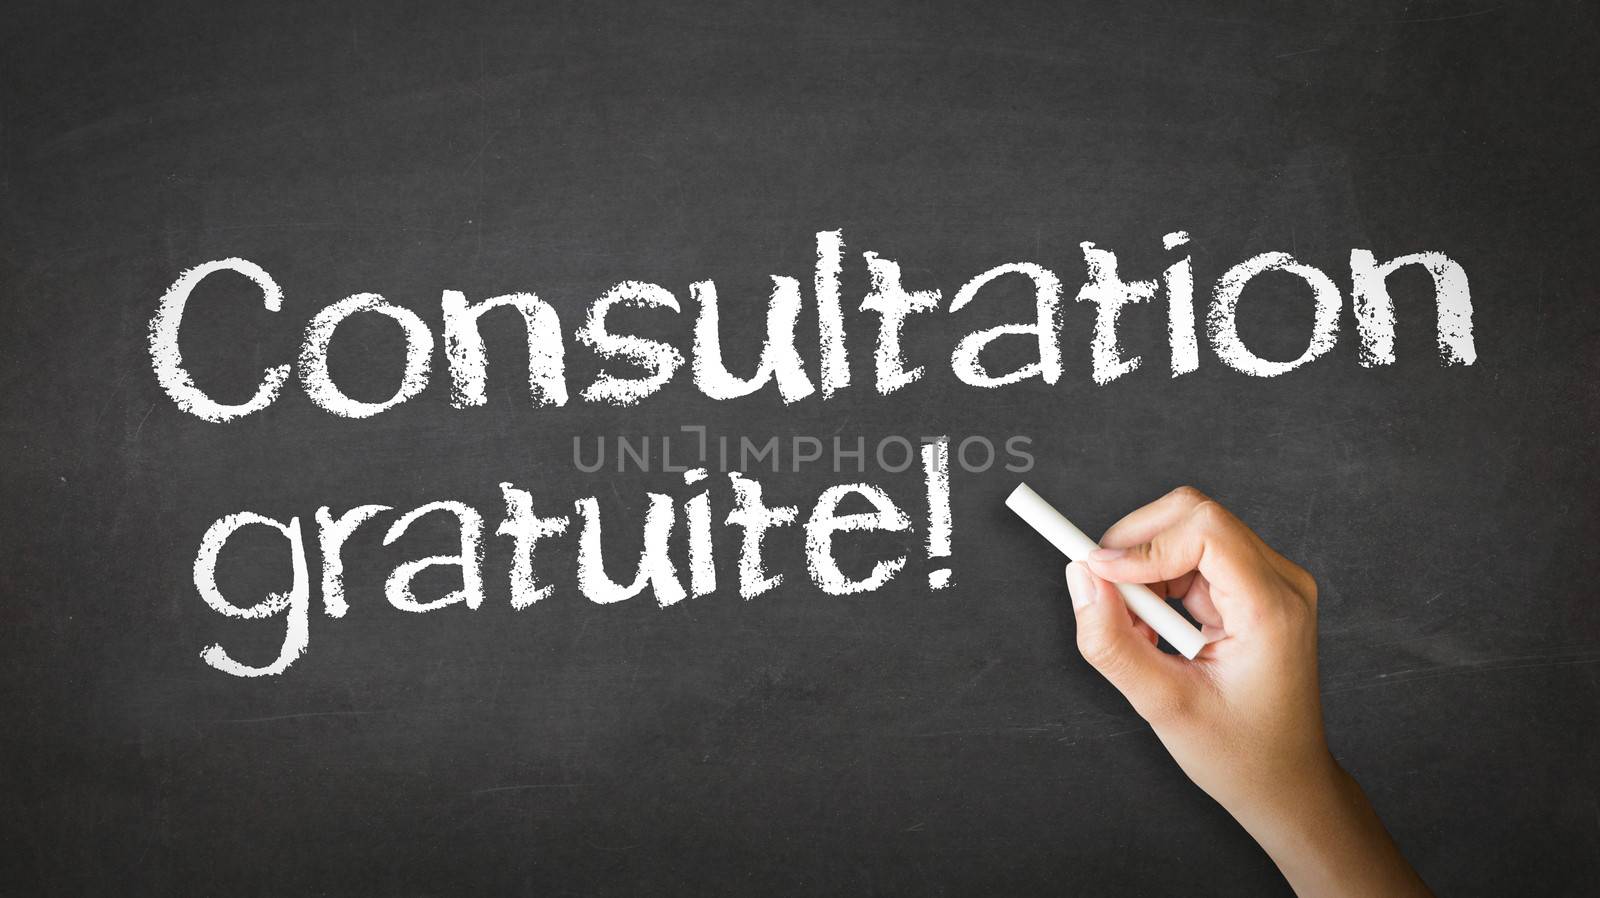 Free Consultation (In French) by kbuntu